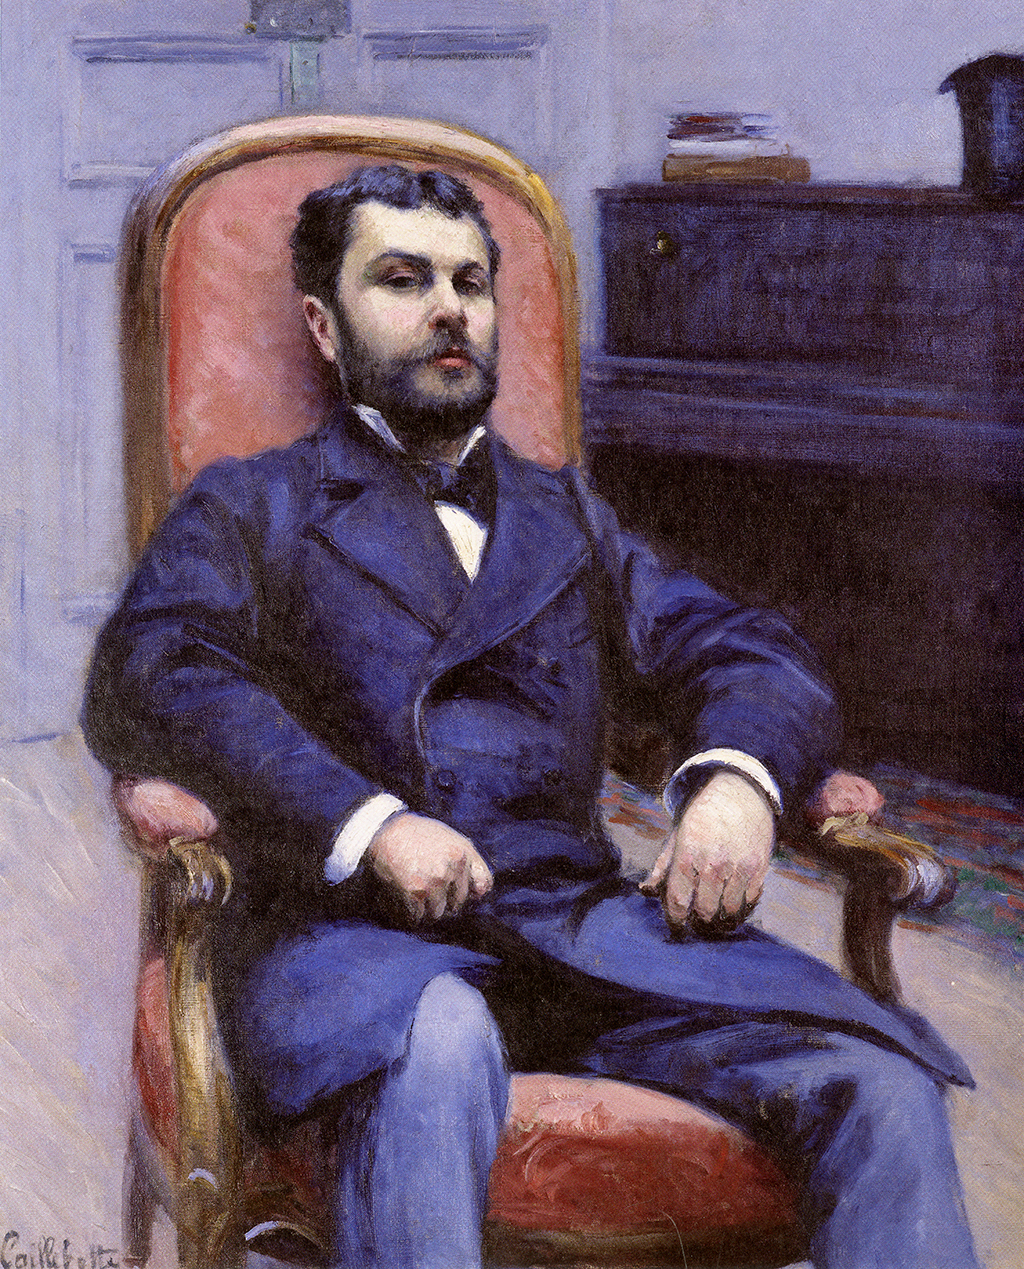 A painting depicting a man slouching back in a wooden chair with a red back cushion. He wears a black suit with a black tie. His arms lay on the resting on the armrests of the chair. In the background, there is black cabinet next to a white door.